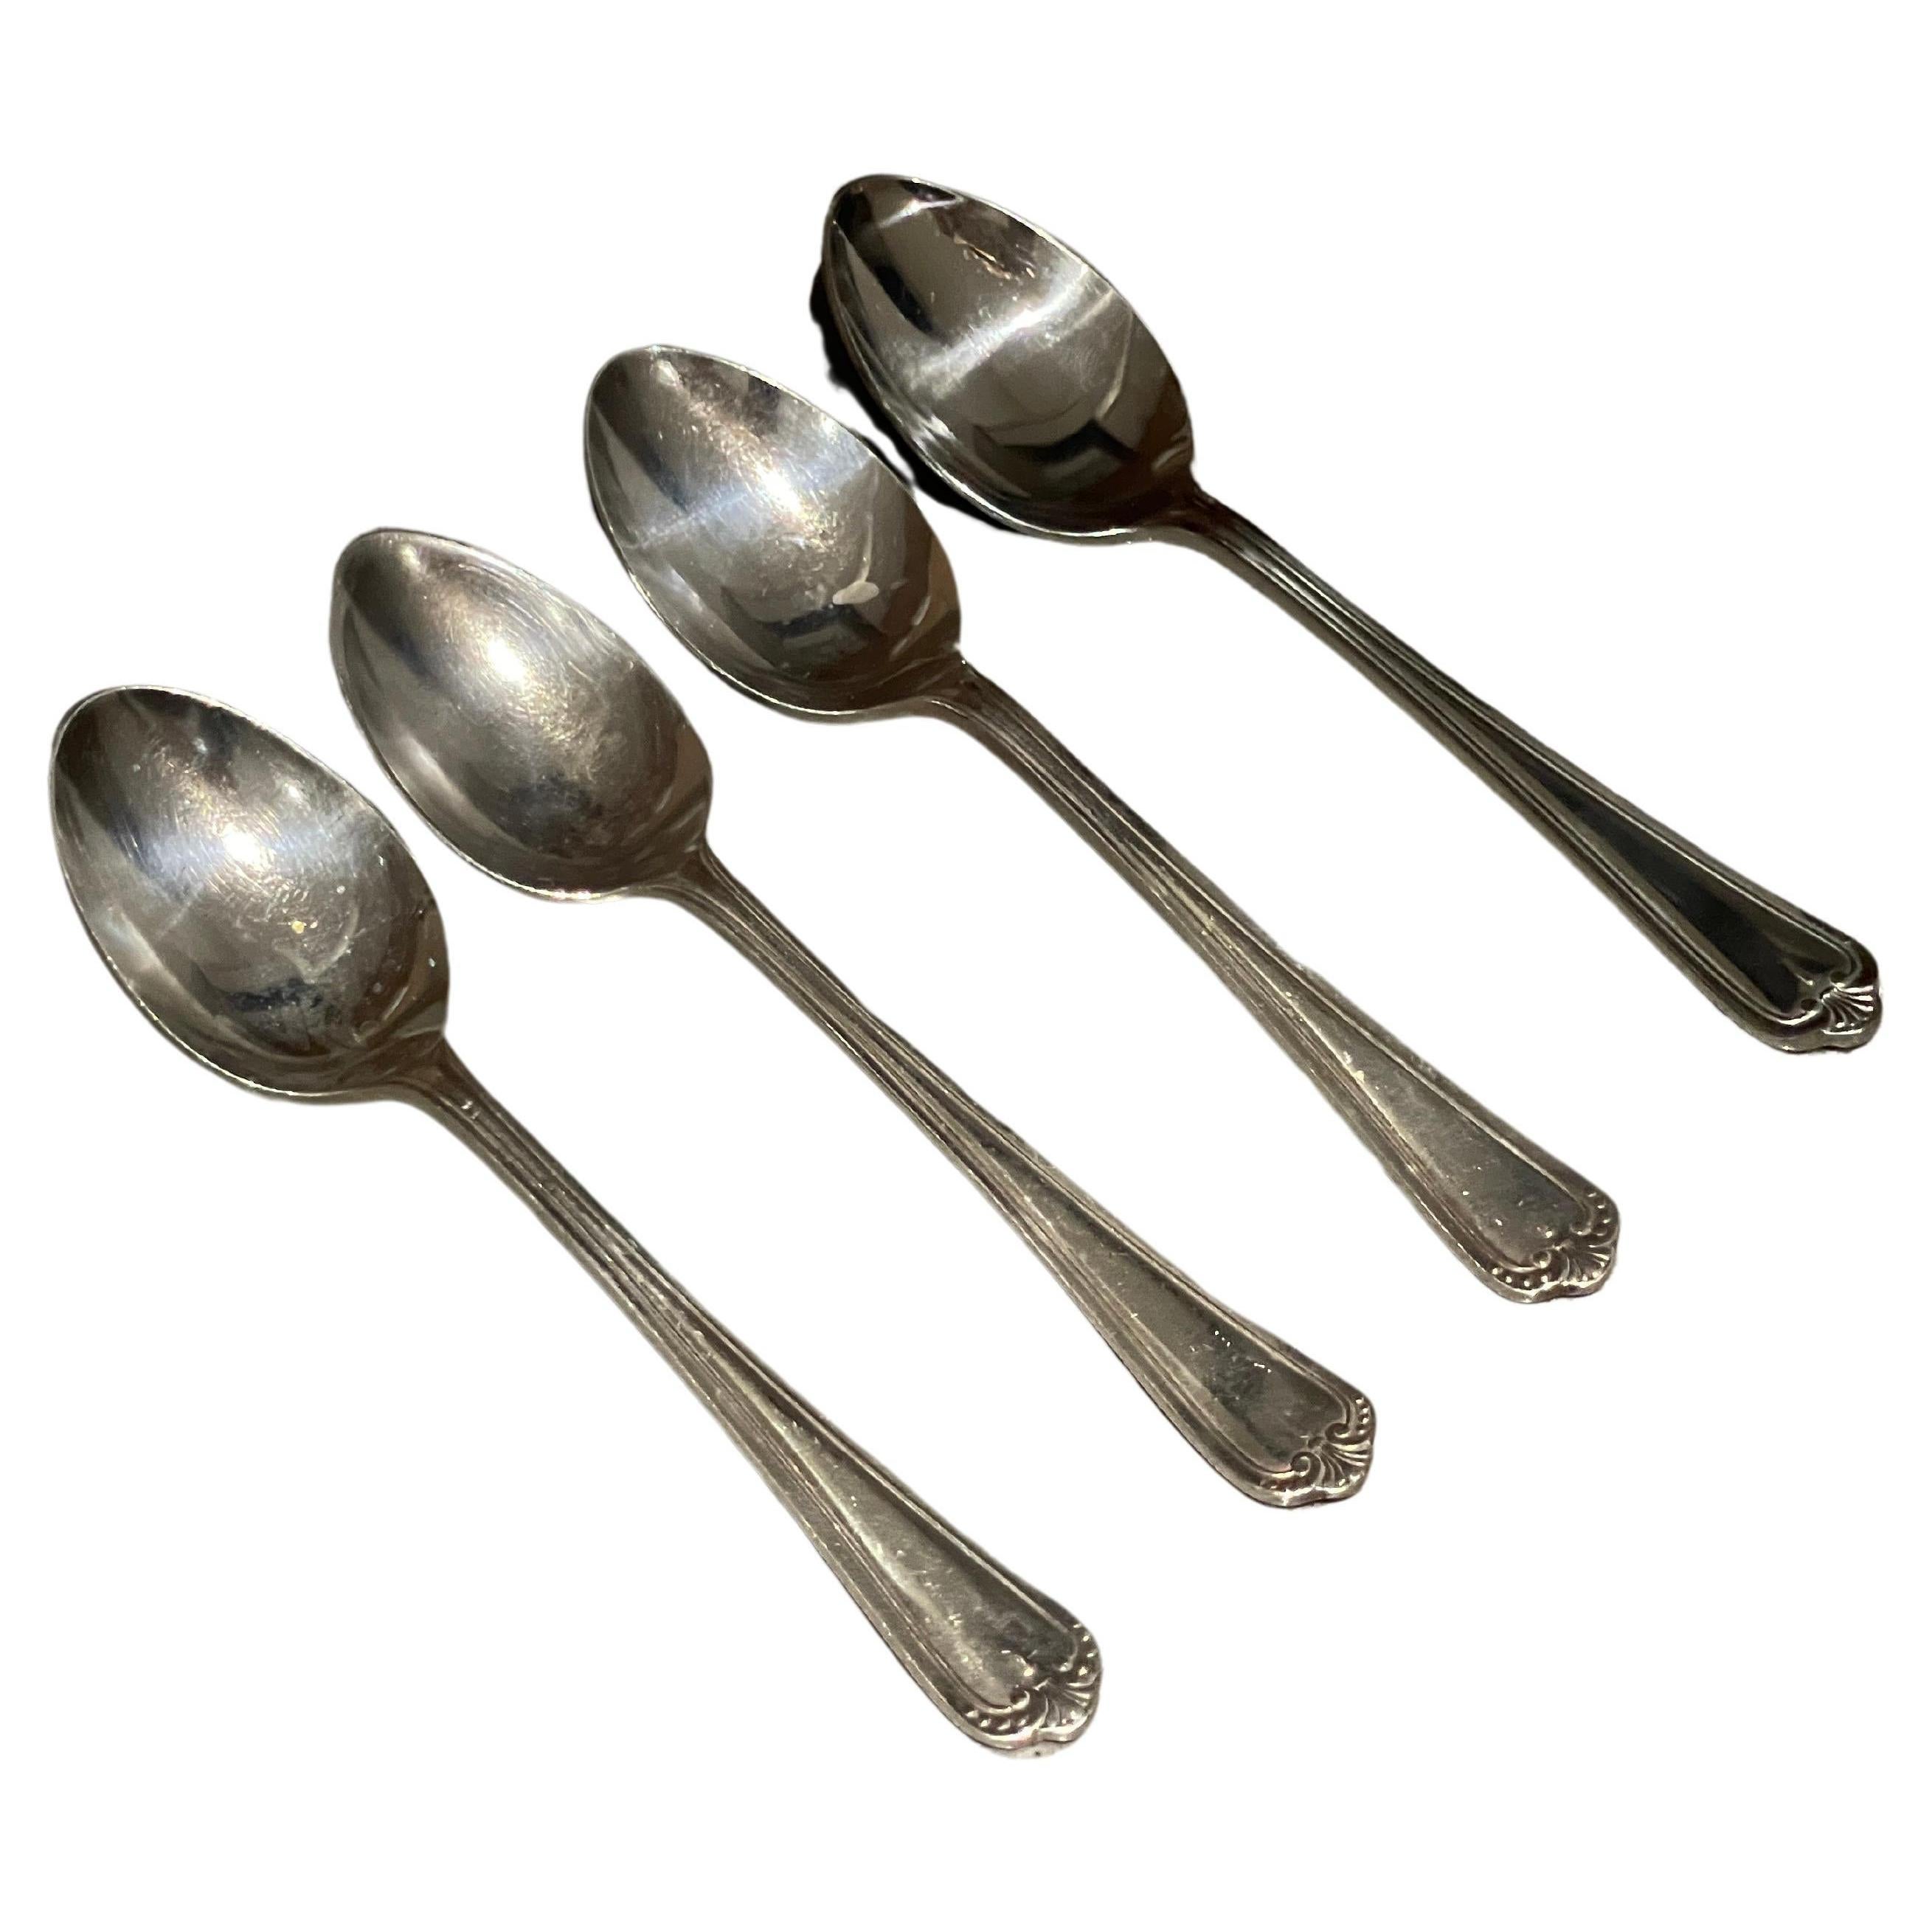 A set of 4 Four Tea Coffee Spoon Stainless Sheffield England 1930s Art Deco For Sale